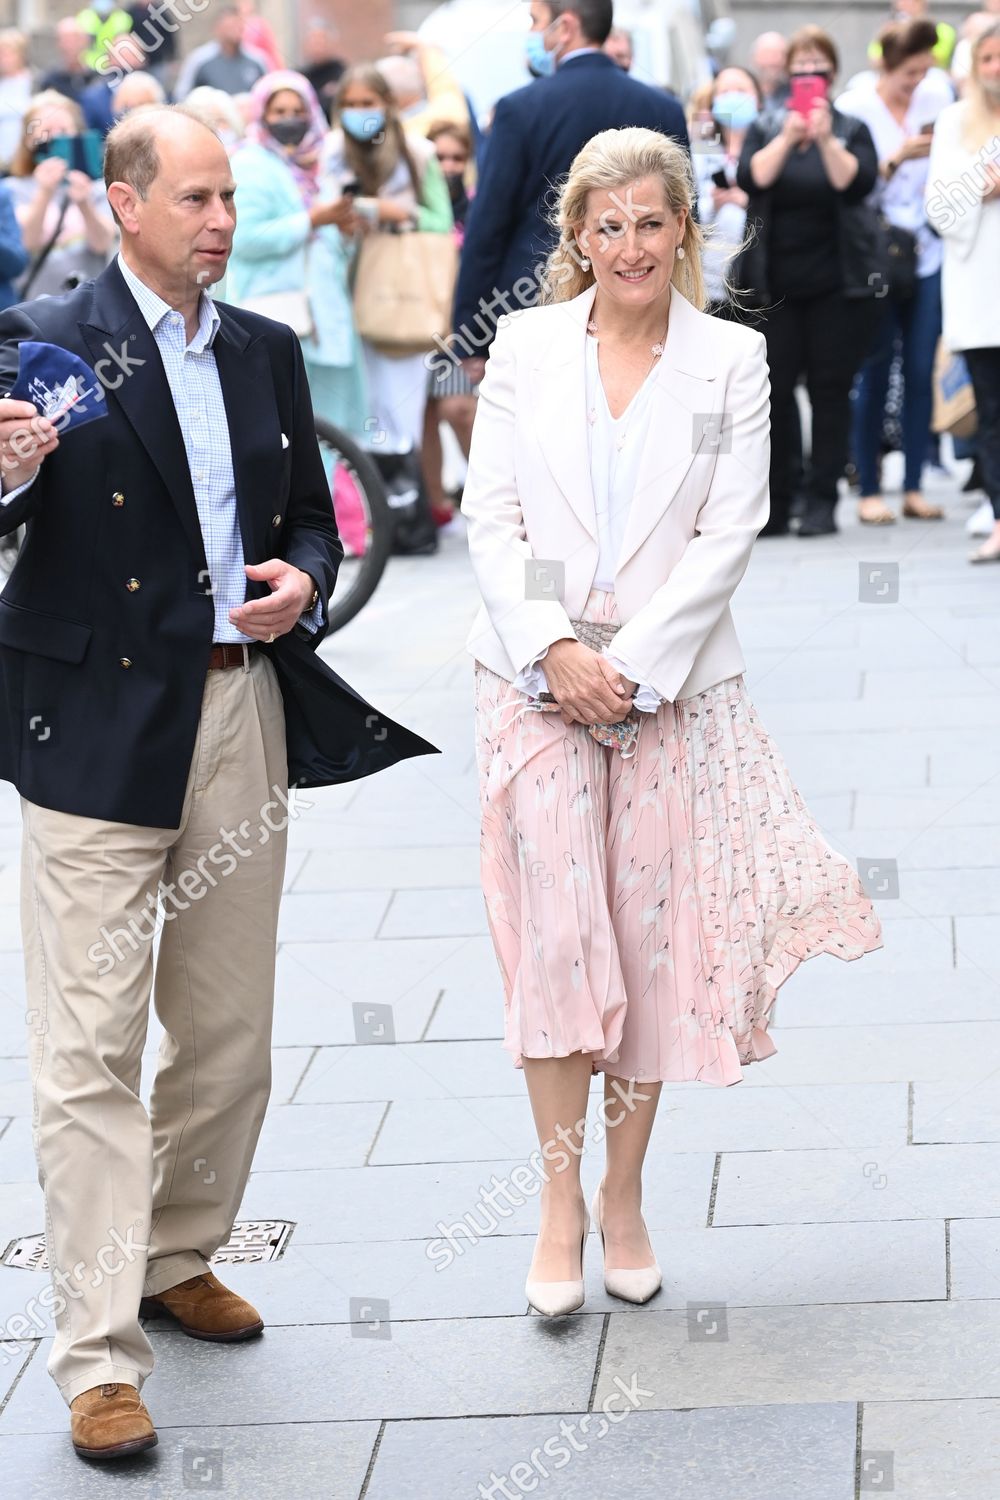 prince-edward-and-sophie-countess-of-wessex-visit-to-edinburgh-scotland-uk-shutterstock-editorial-12173651l.jpg